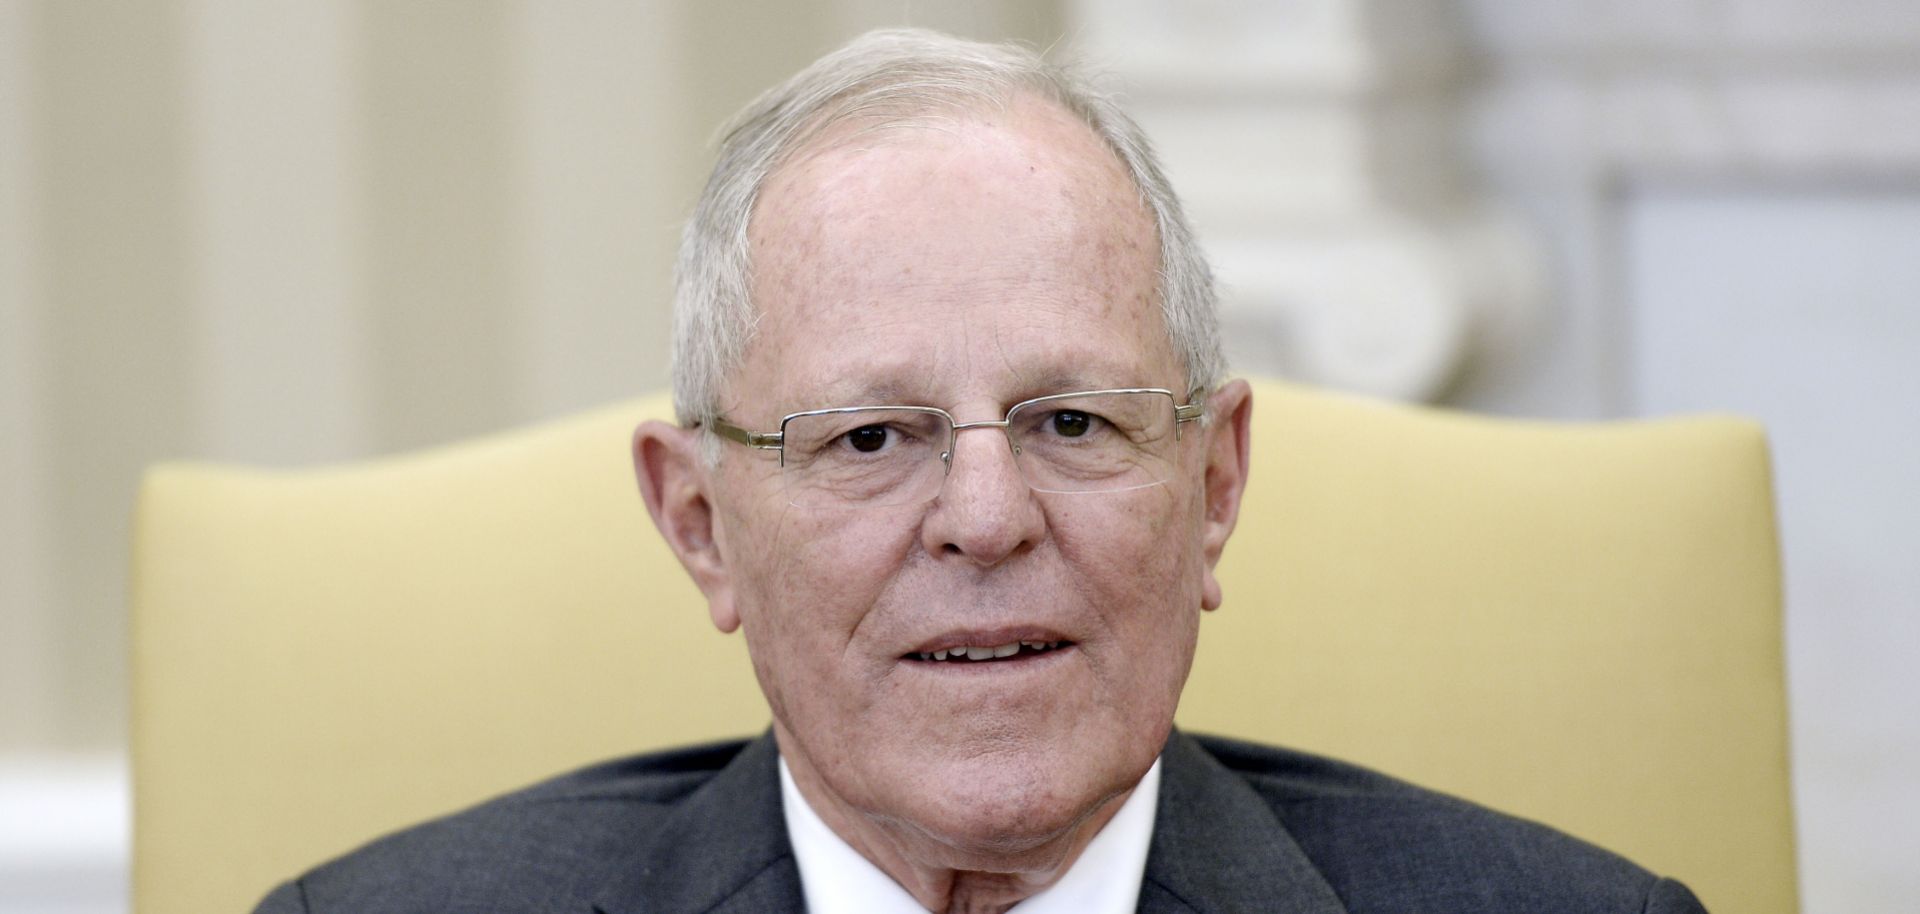 Peruvian President Pedro Pablo Kuczynski sits in the Oval Office of the White House during a meeting with U.S. President Donald Trump in February 2017.